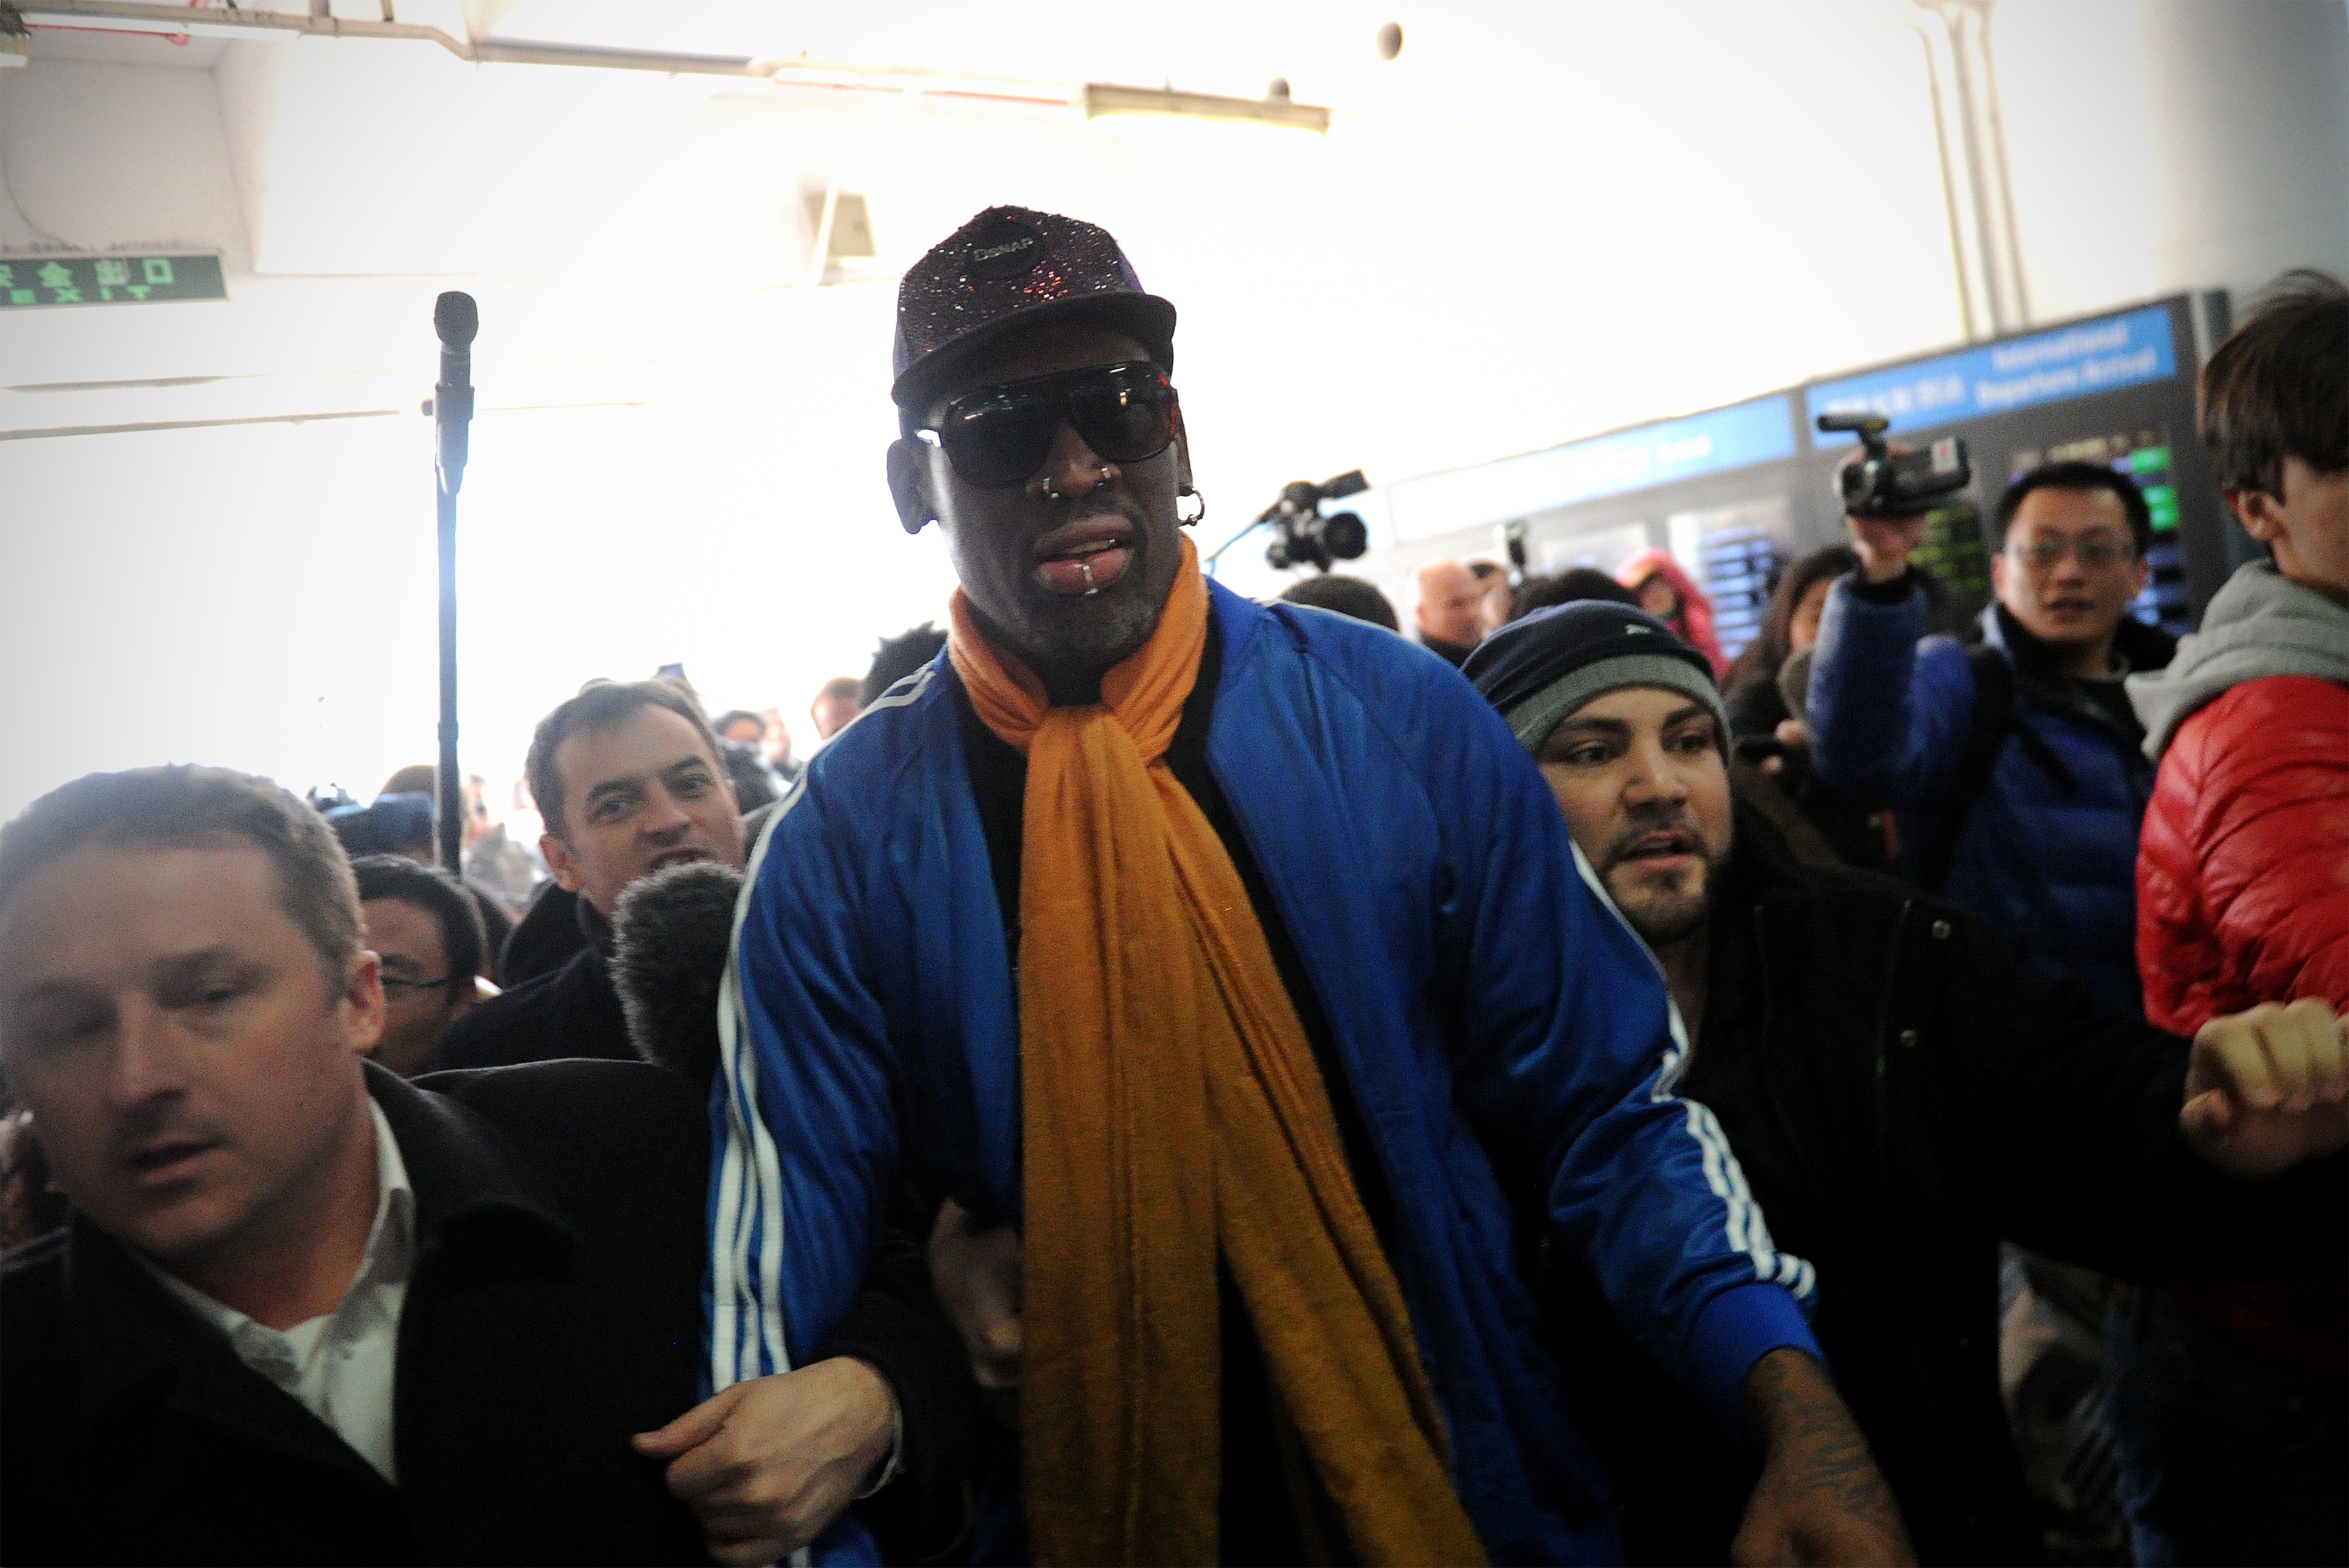 Former US basketball player Dennis Rodman (C) arrives at Beijing International Airport from North Korea on January 13, 2014.  Rodman returned to China from Pyongyang after a seven-day trip where he sang "Happy birthday to you!" to North Korean leader Kim Jong-Un on January 8. (WANG ZHAO/AFP/Getty Images)